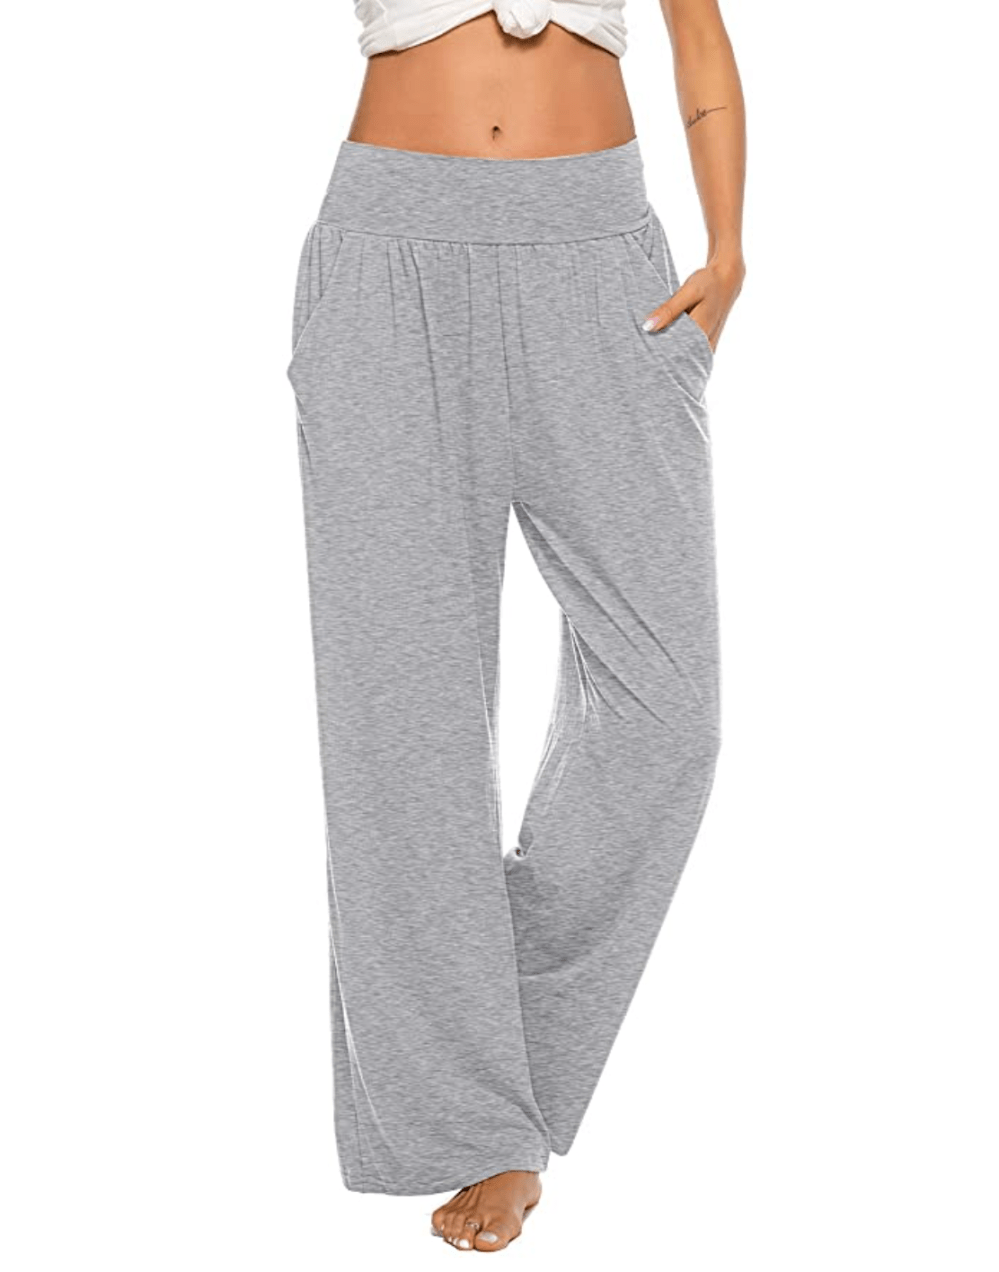 Zjct Seriously Comfy Sweats Complete Your Day-Off Lounge Look | UsWeekly